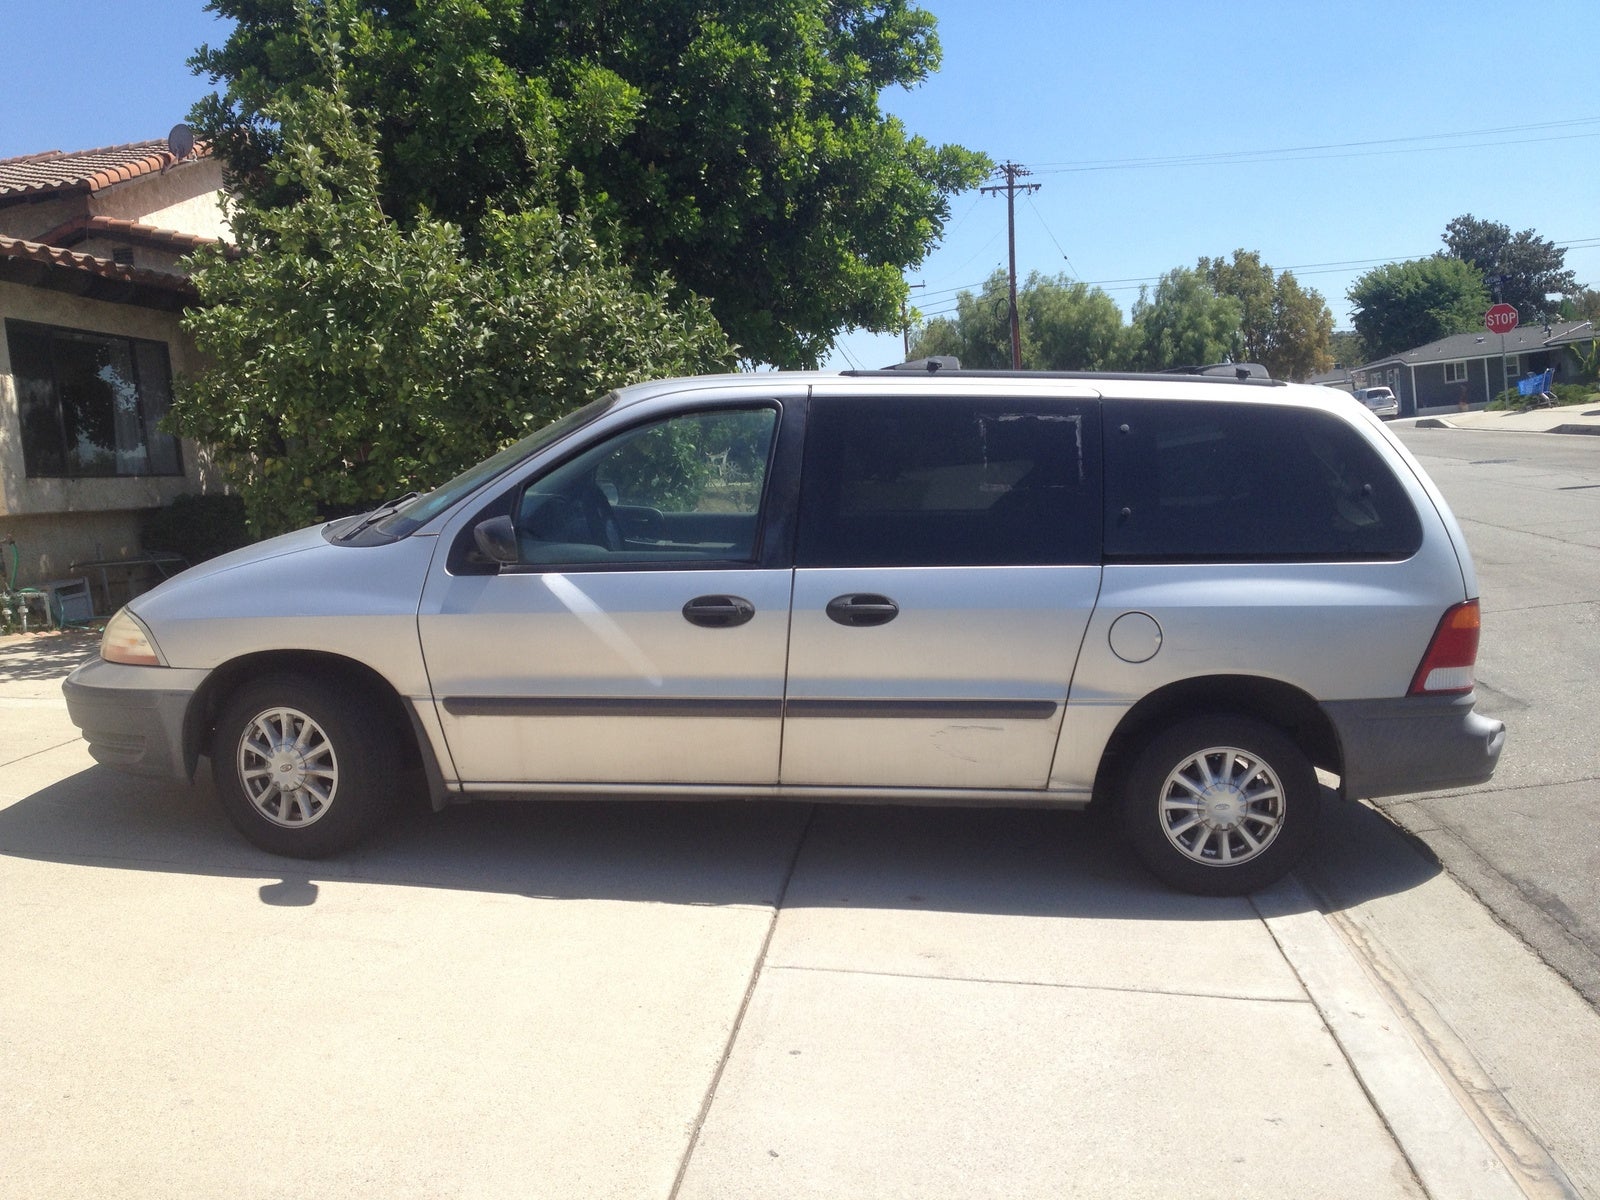 2003 Ford windstar recall 11s16 #4